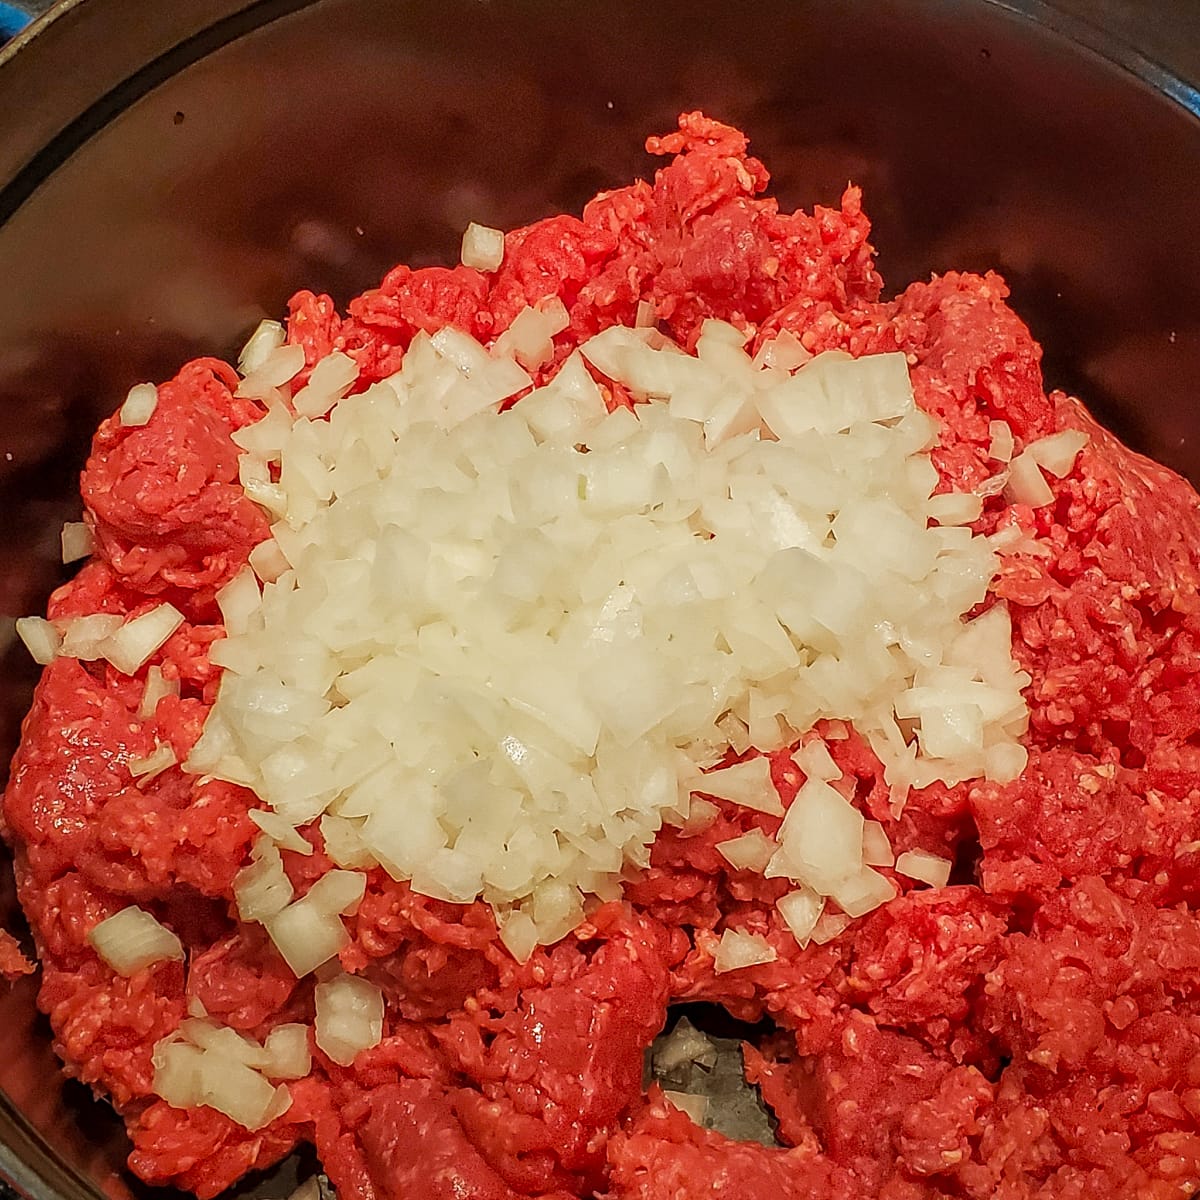 Ground beef and onion cooking in a Dutch oven.